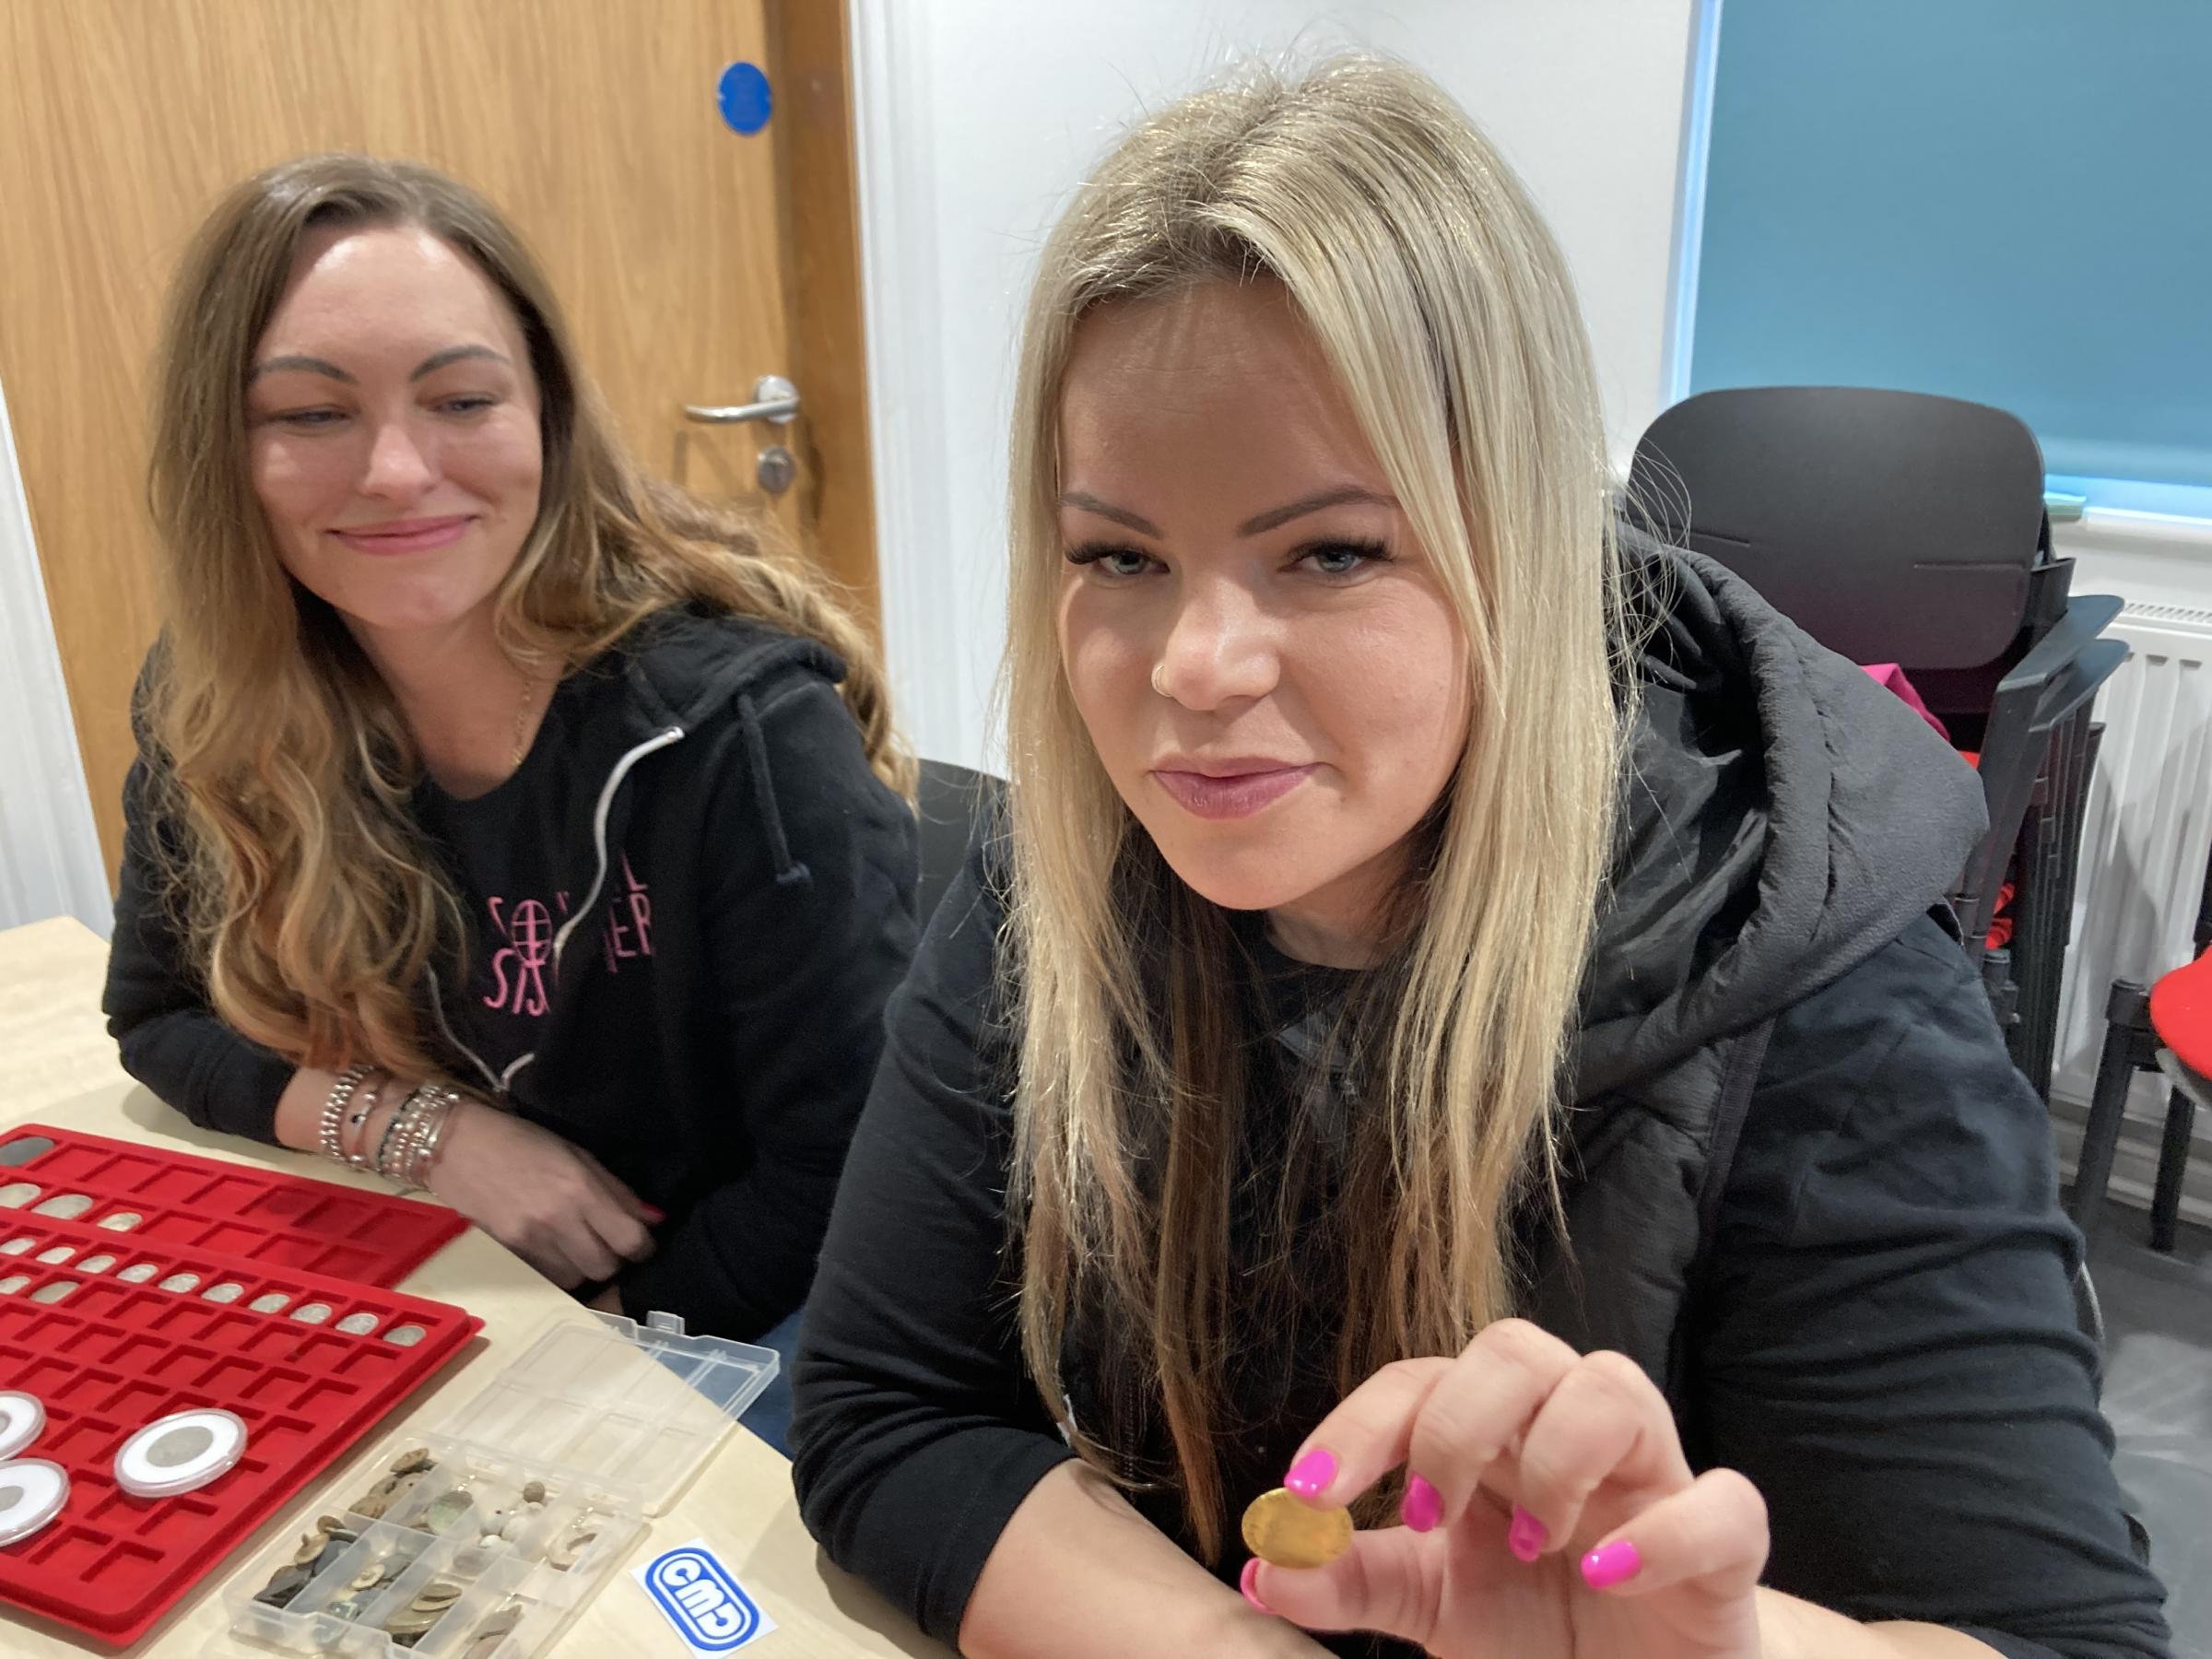 You Tube metal detectorist the Soil Sisters; Nikki Foster (left) And Sam Moss (right) at the PAS Cymru event at Storiel Bangor. Sam shows the gold guinea she found metal detecting. Image Dale Spridgeon